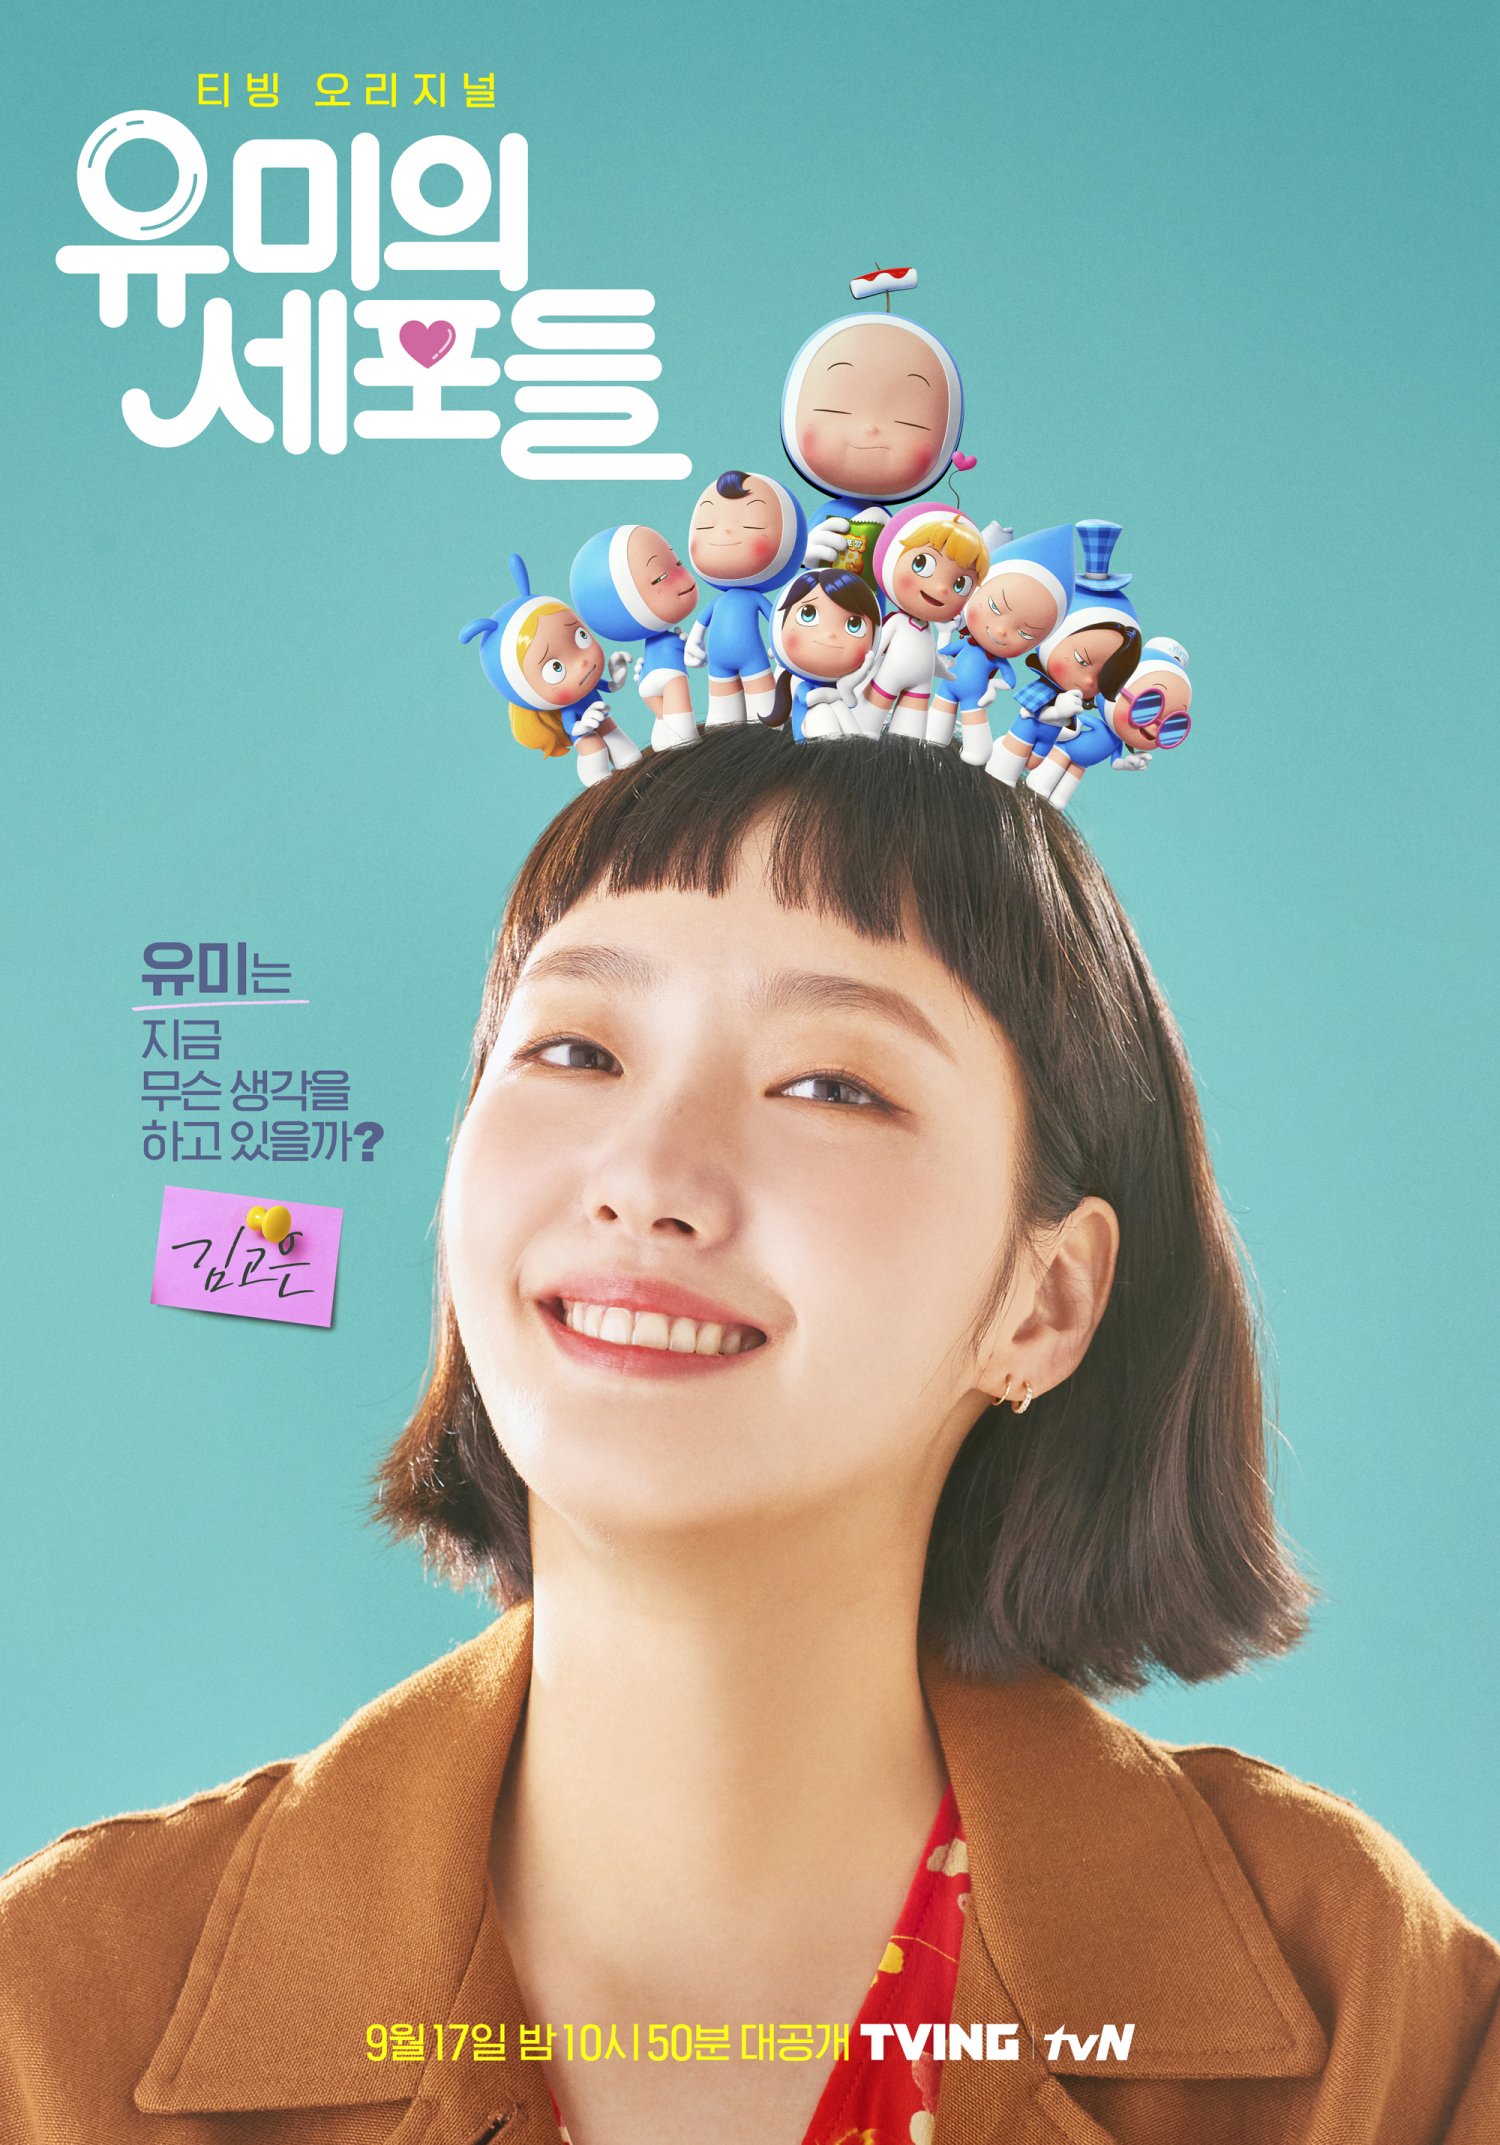 Photos Character Posters Added for the Upcoming Korean Drama 'Yumi's Cells' HanCinema